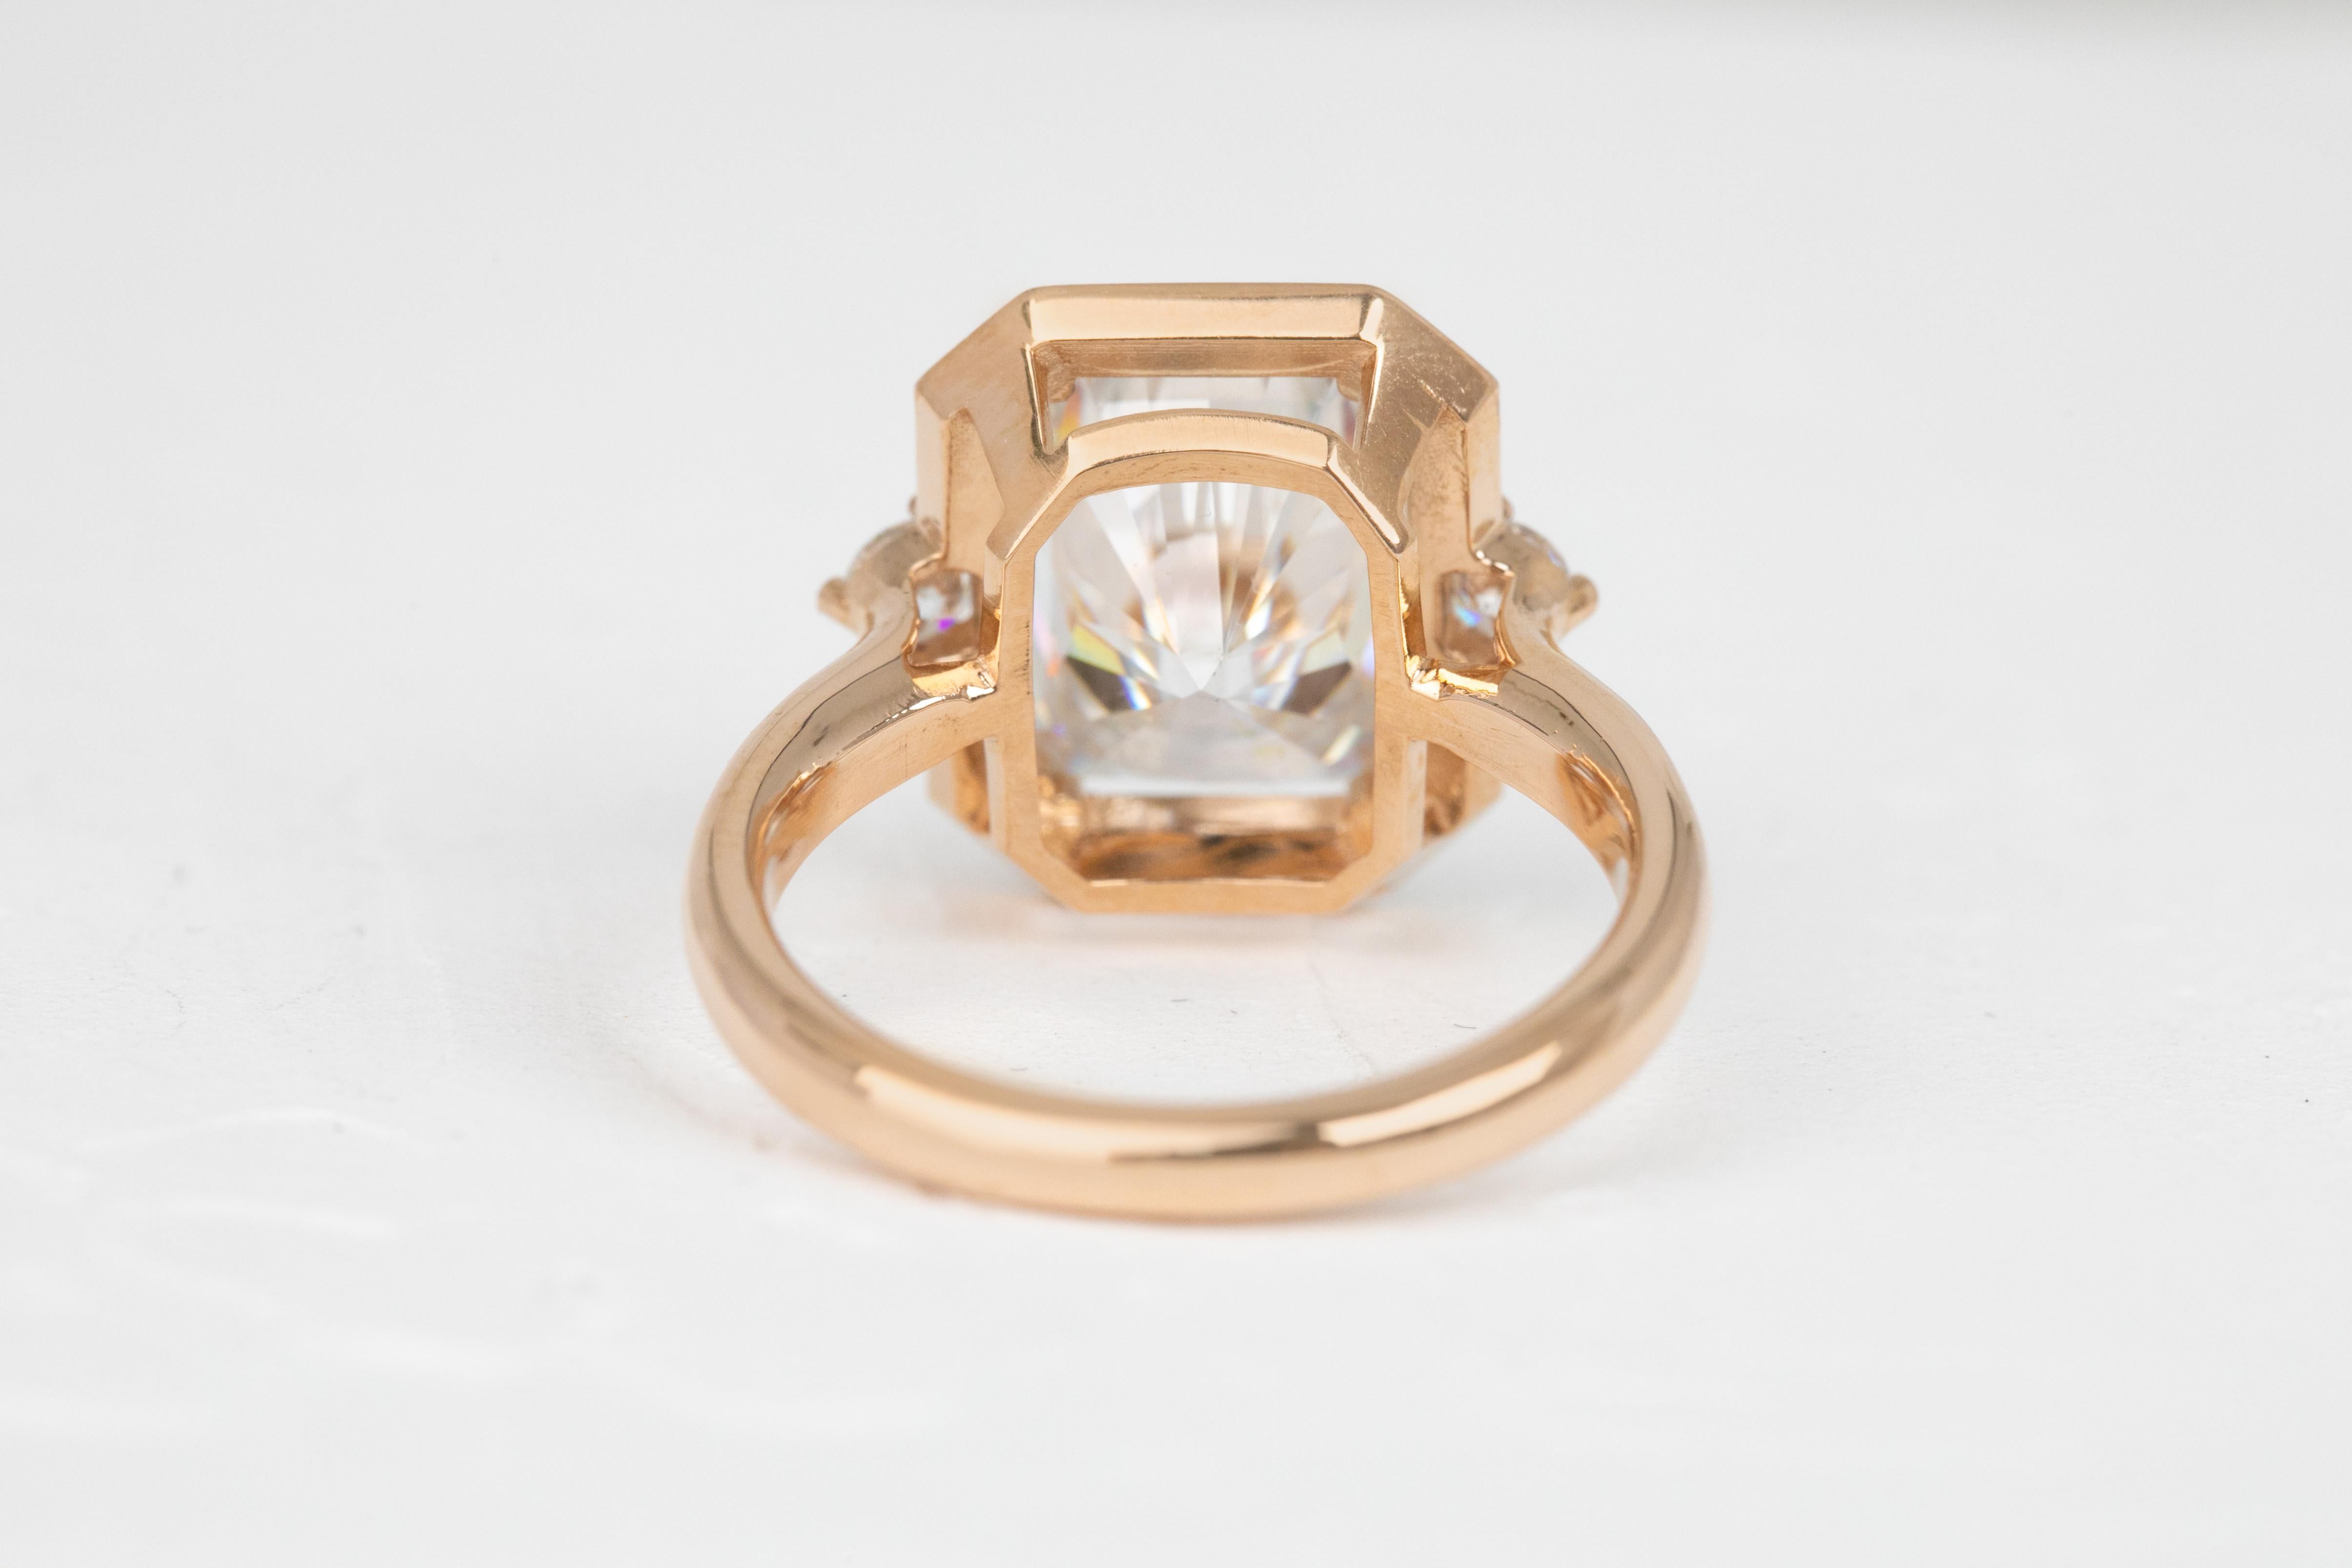 For Sale:  14k Solid Gold Art Deco Ring, 4.08ct Moissanite Stone Ring and Enamel Ring 4